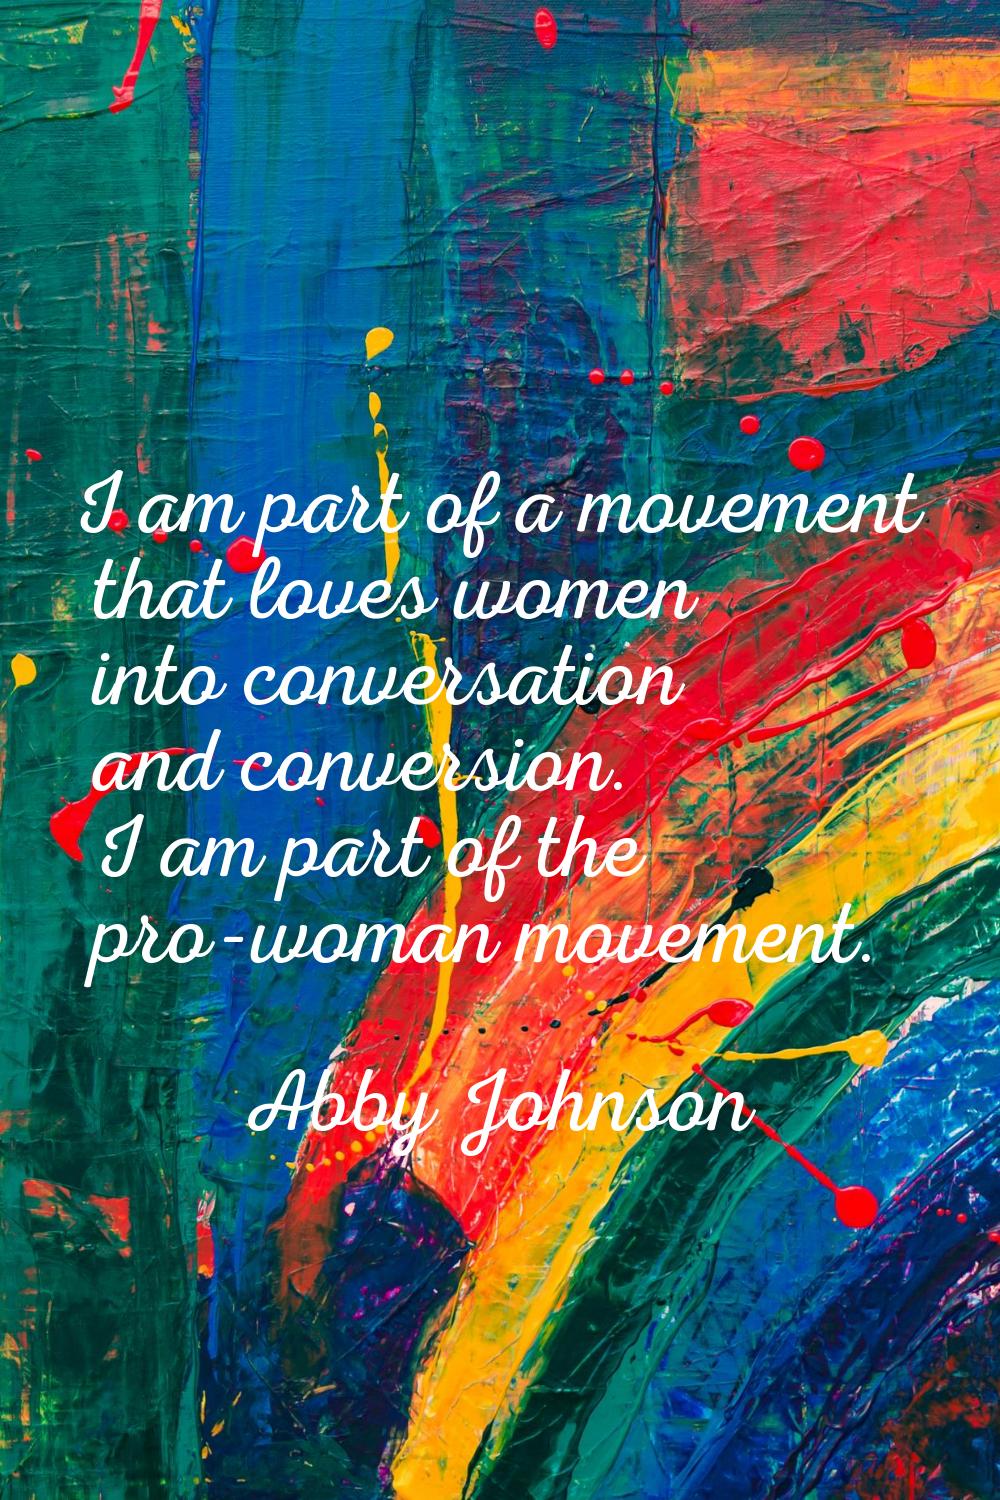 I am part of a movement that loves women into conversation and conversion. I am part of the pro-wom